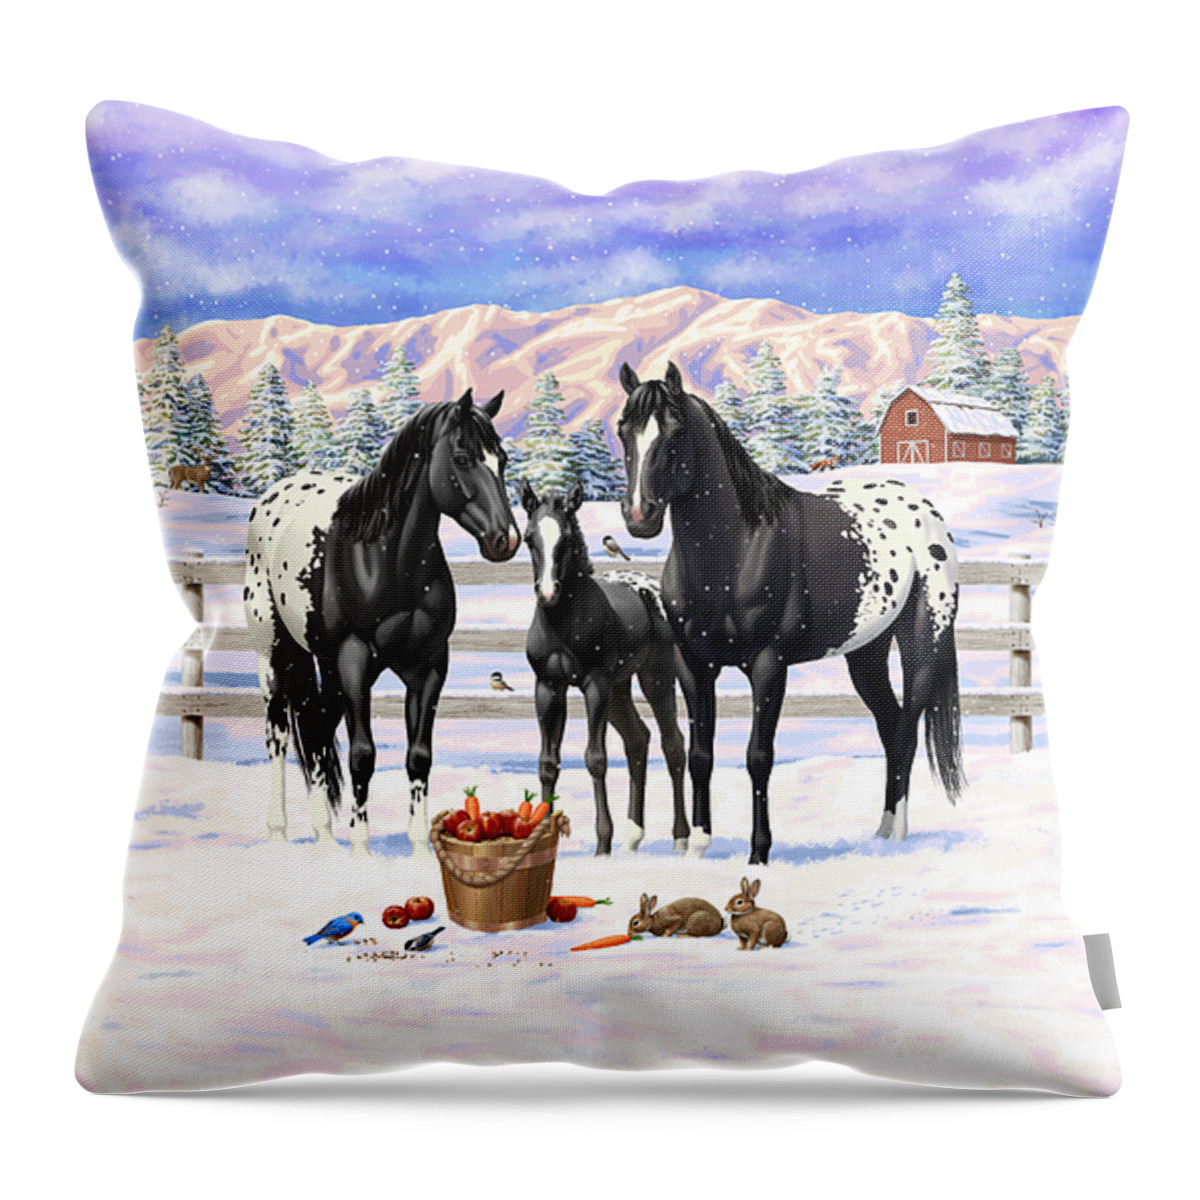 Horses Throw Pillow featuring the painting Black Appaloosa Horses In Snow by Crista Forest